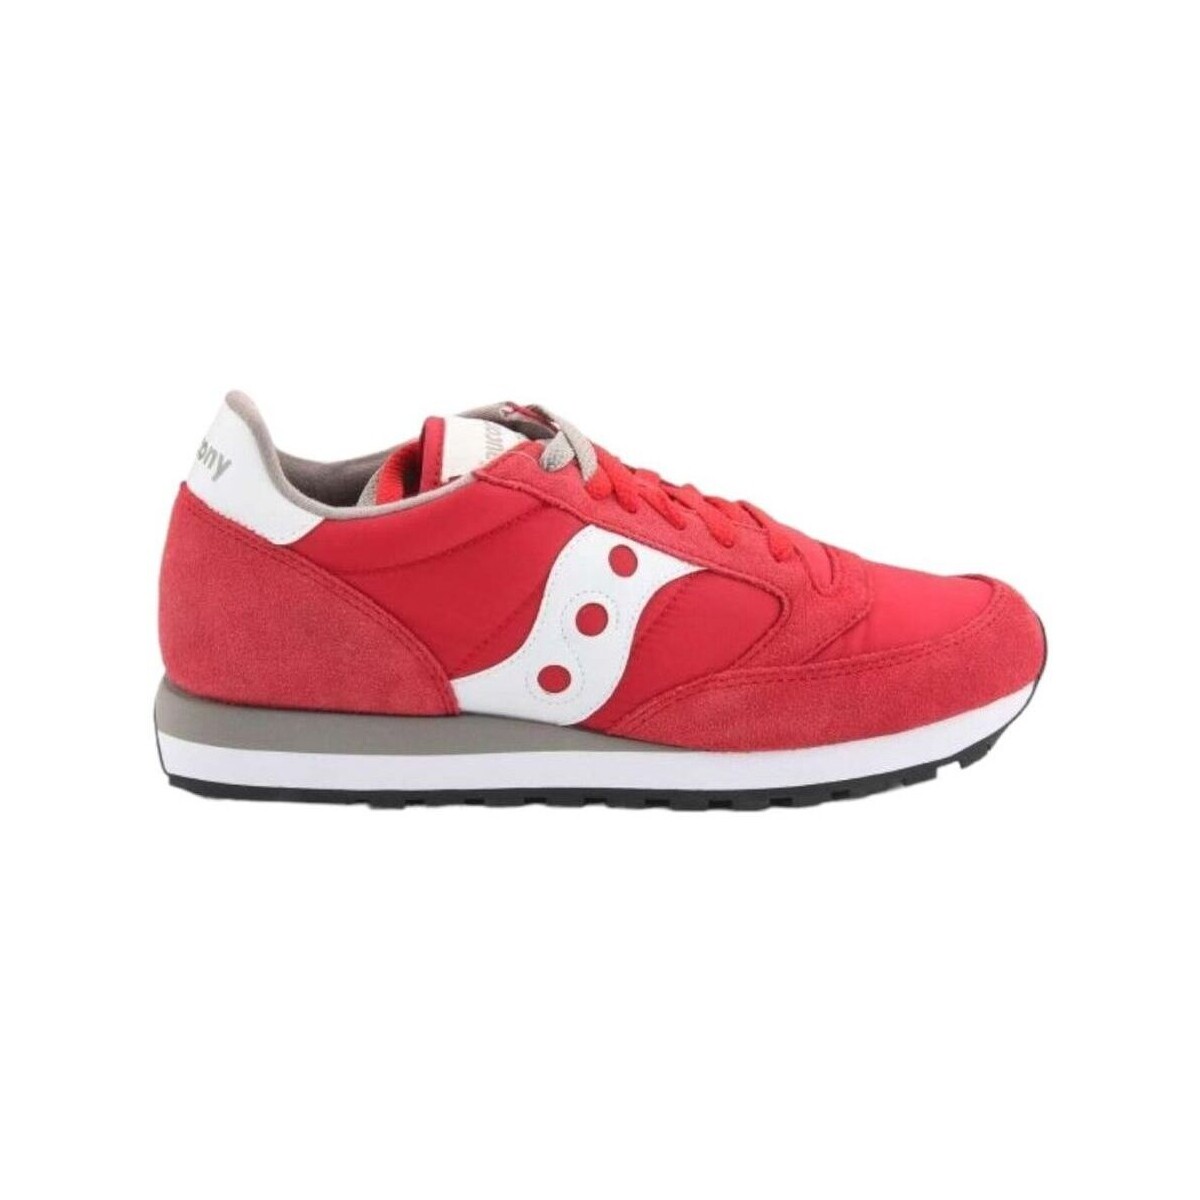 Chaussures Homme Baskets mode Saucony  Rouge